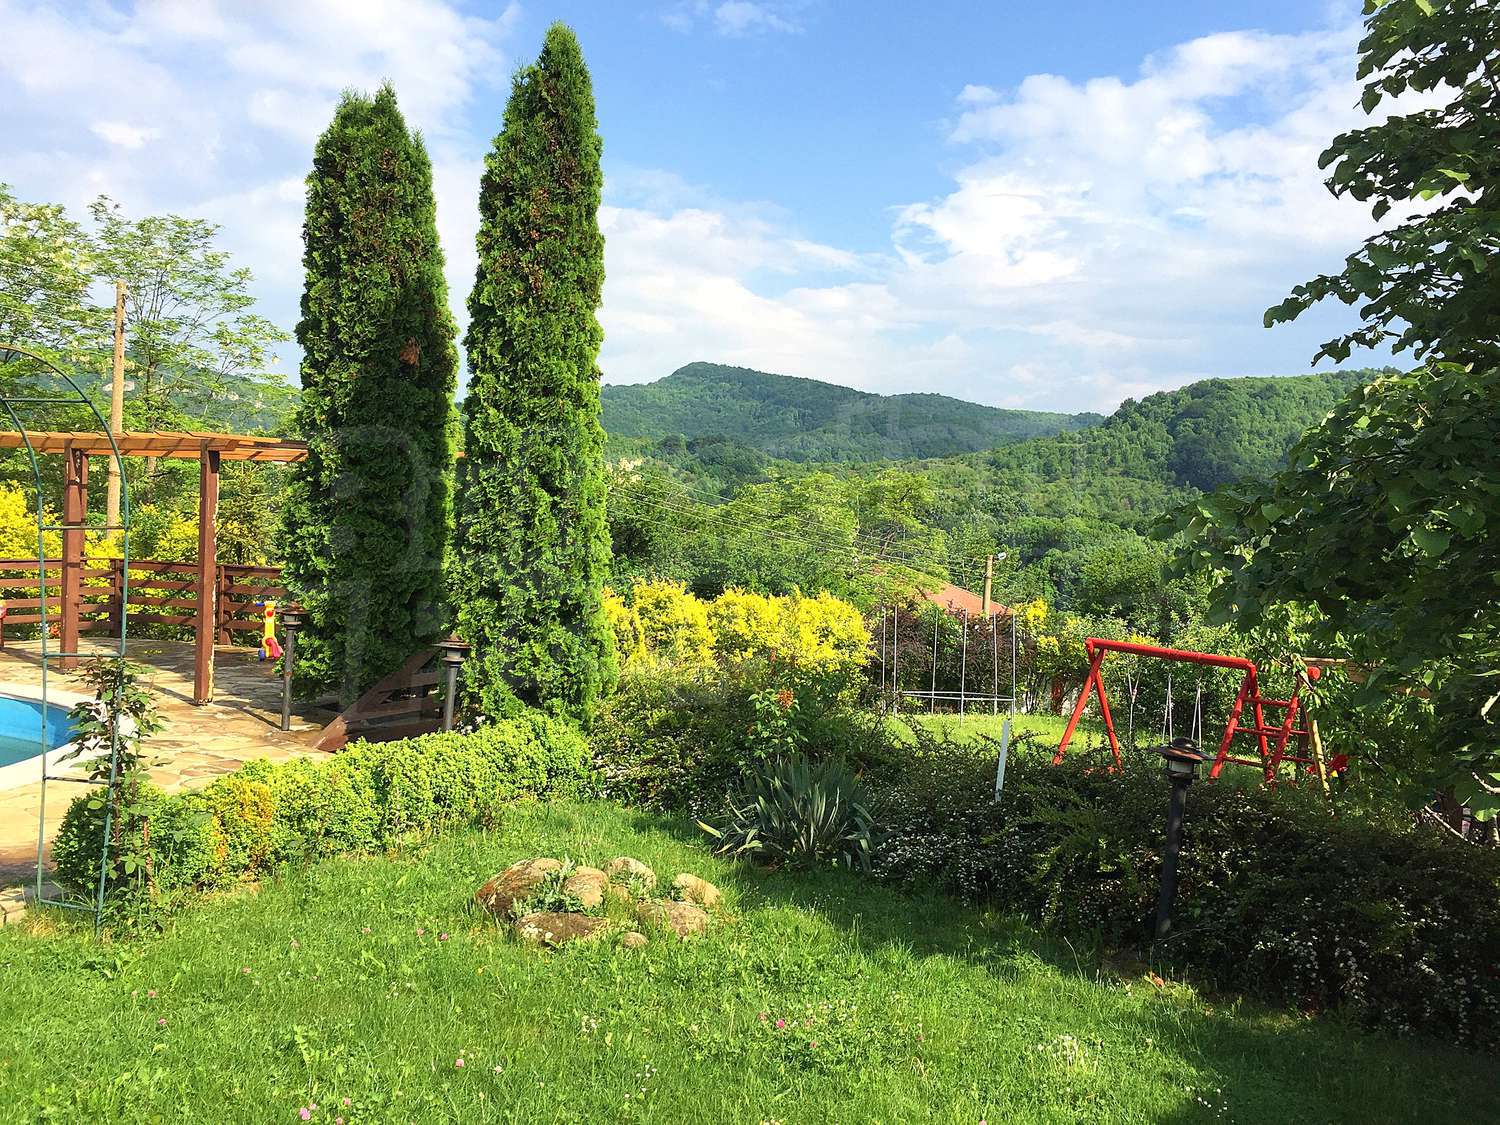 Family holiday complex with two pools, playground and barbecue amidst beautiful and picturesque nature